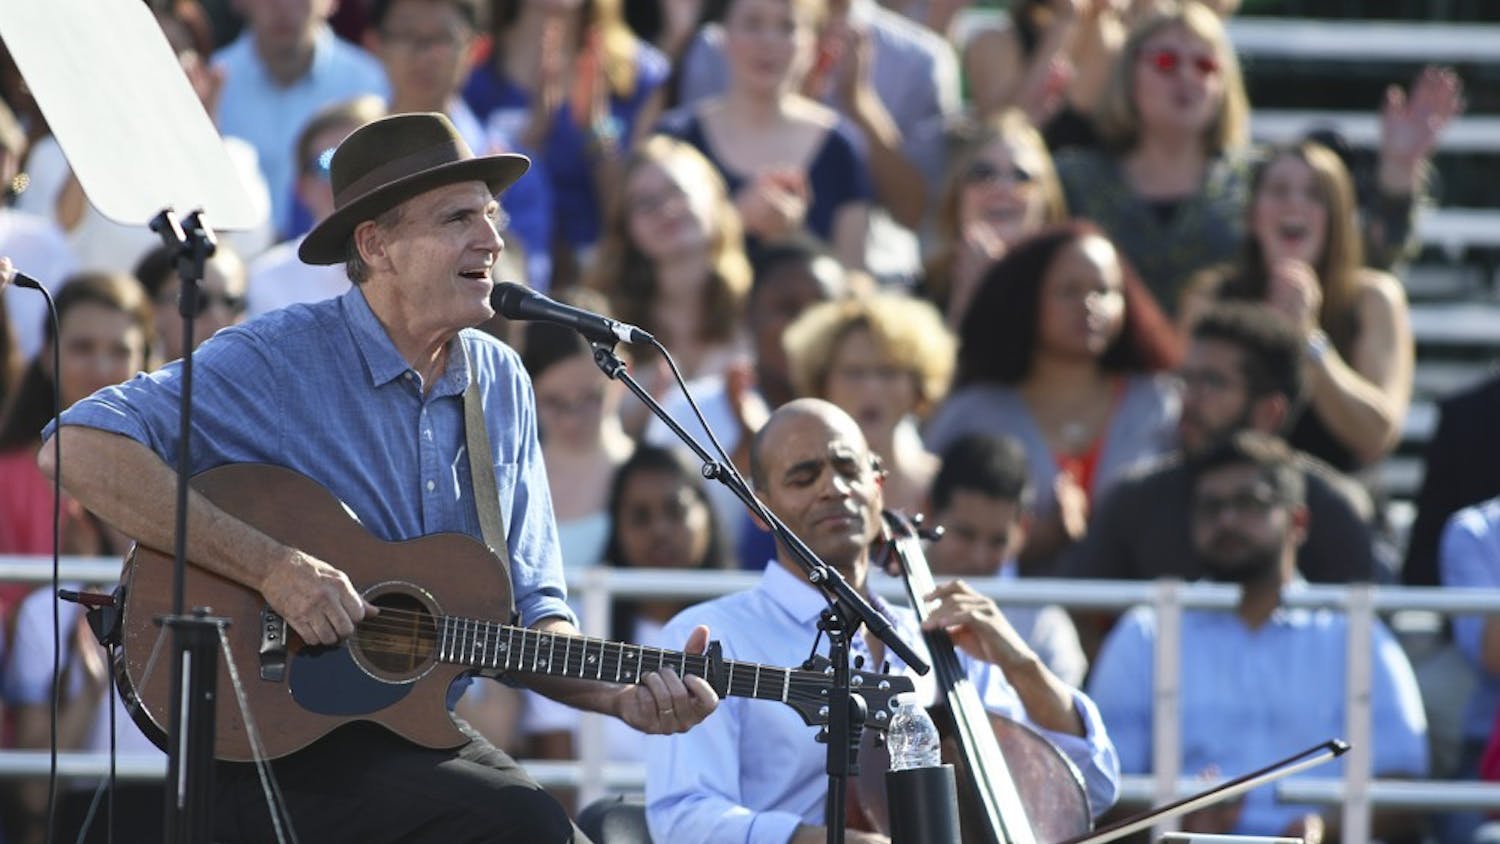 North Carolina native folk singer, James Taylor, sang before President Obama's speech on campus in 2016. Taylor opened with his beloved song "Carolina in My Mind".